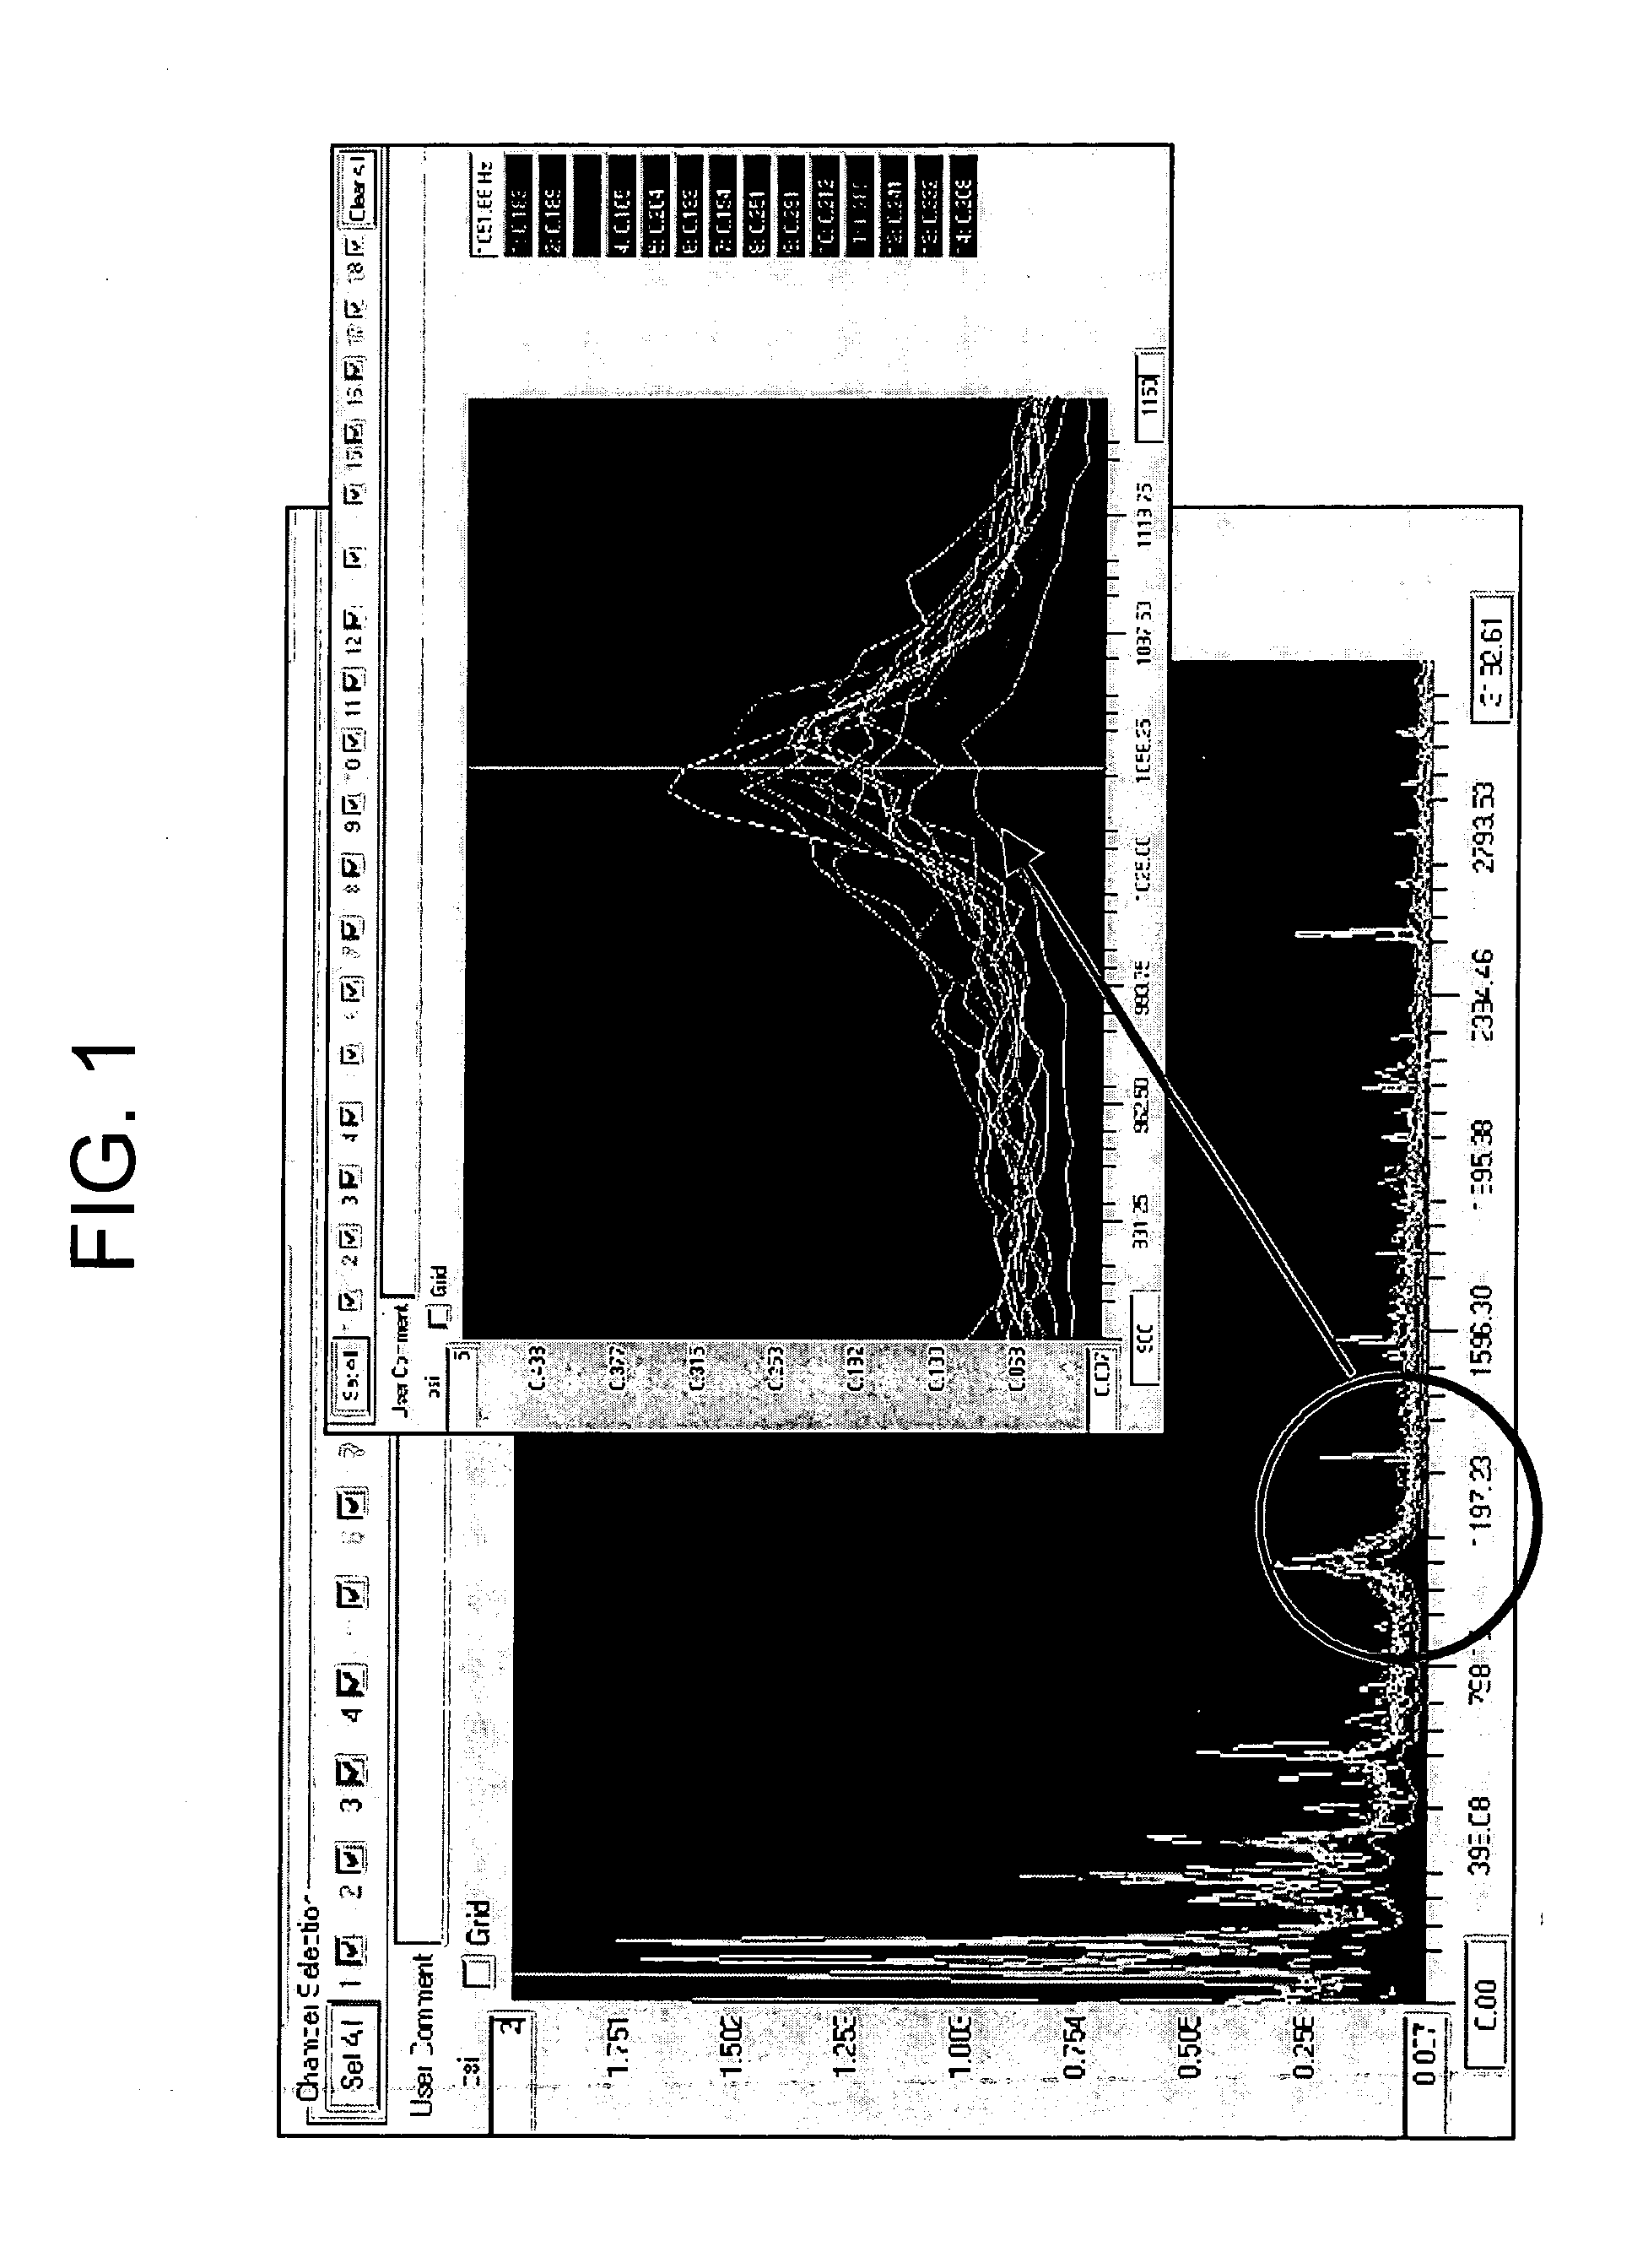 Method and system for determining lean blow out condition for gas turbine combustion cans